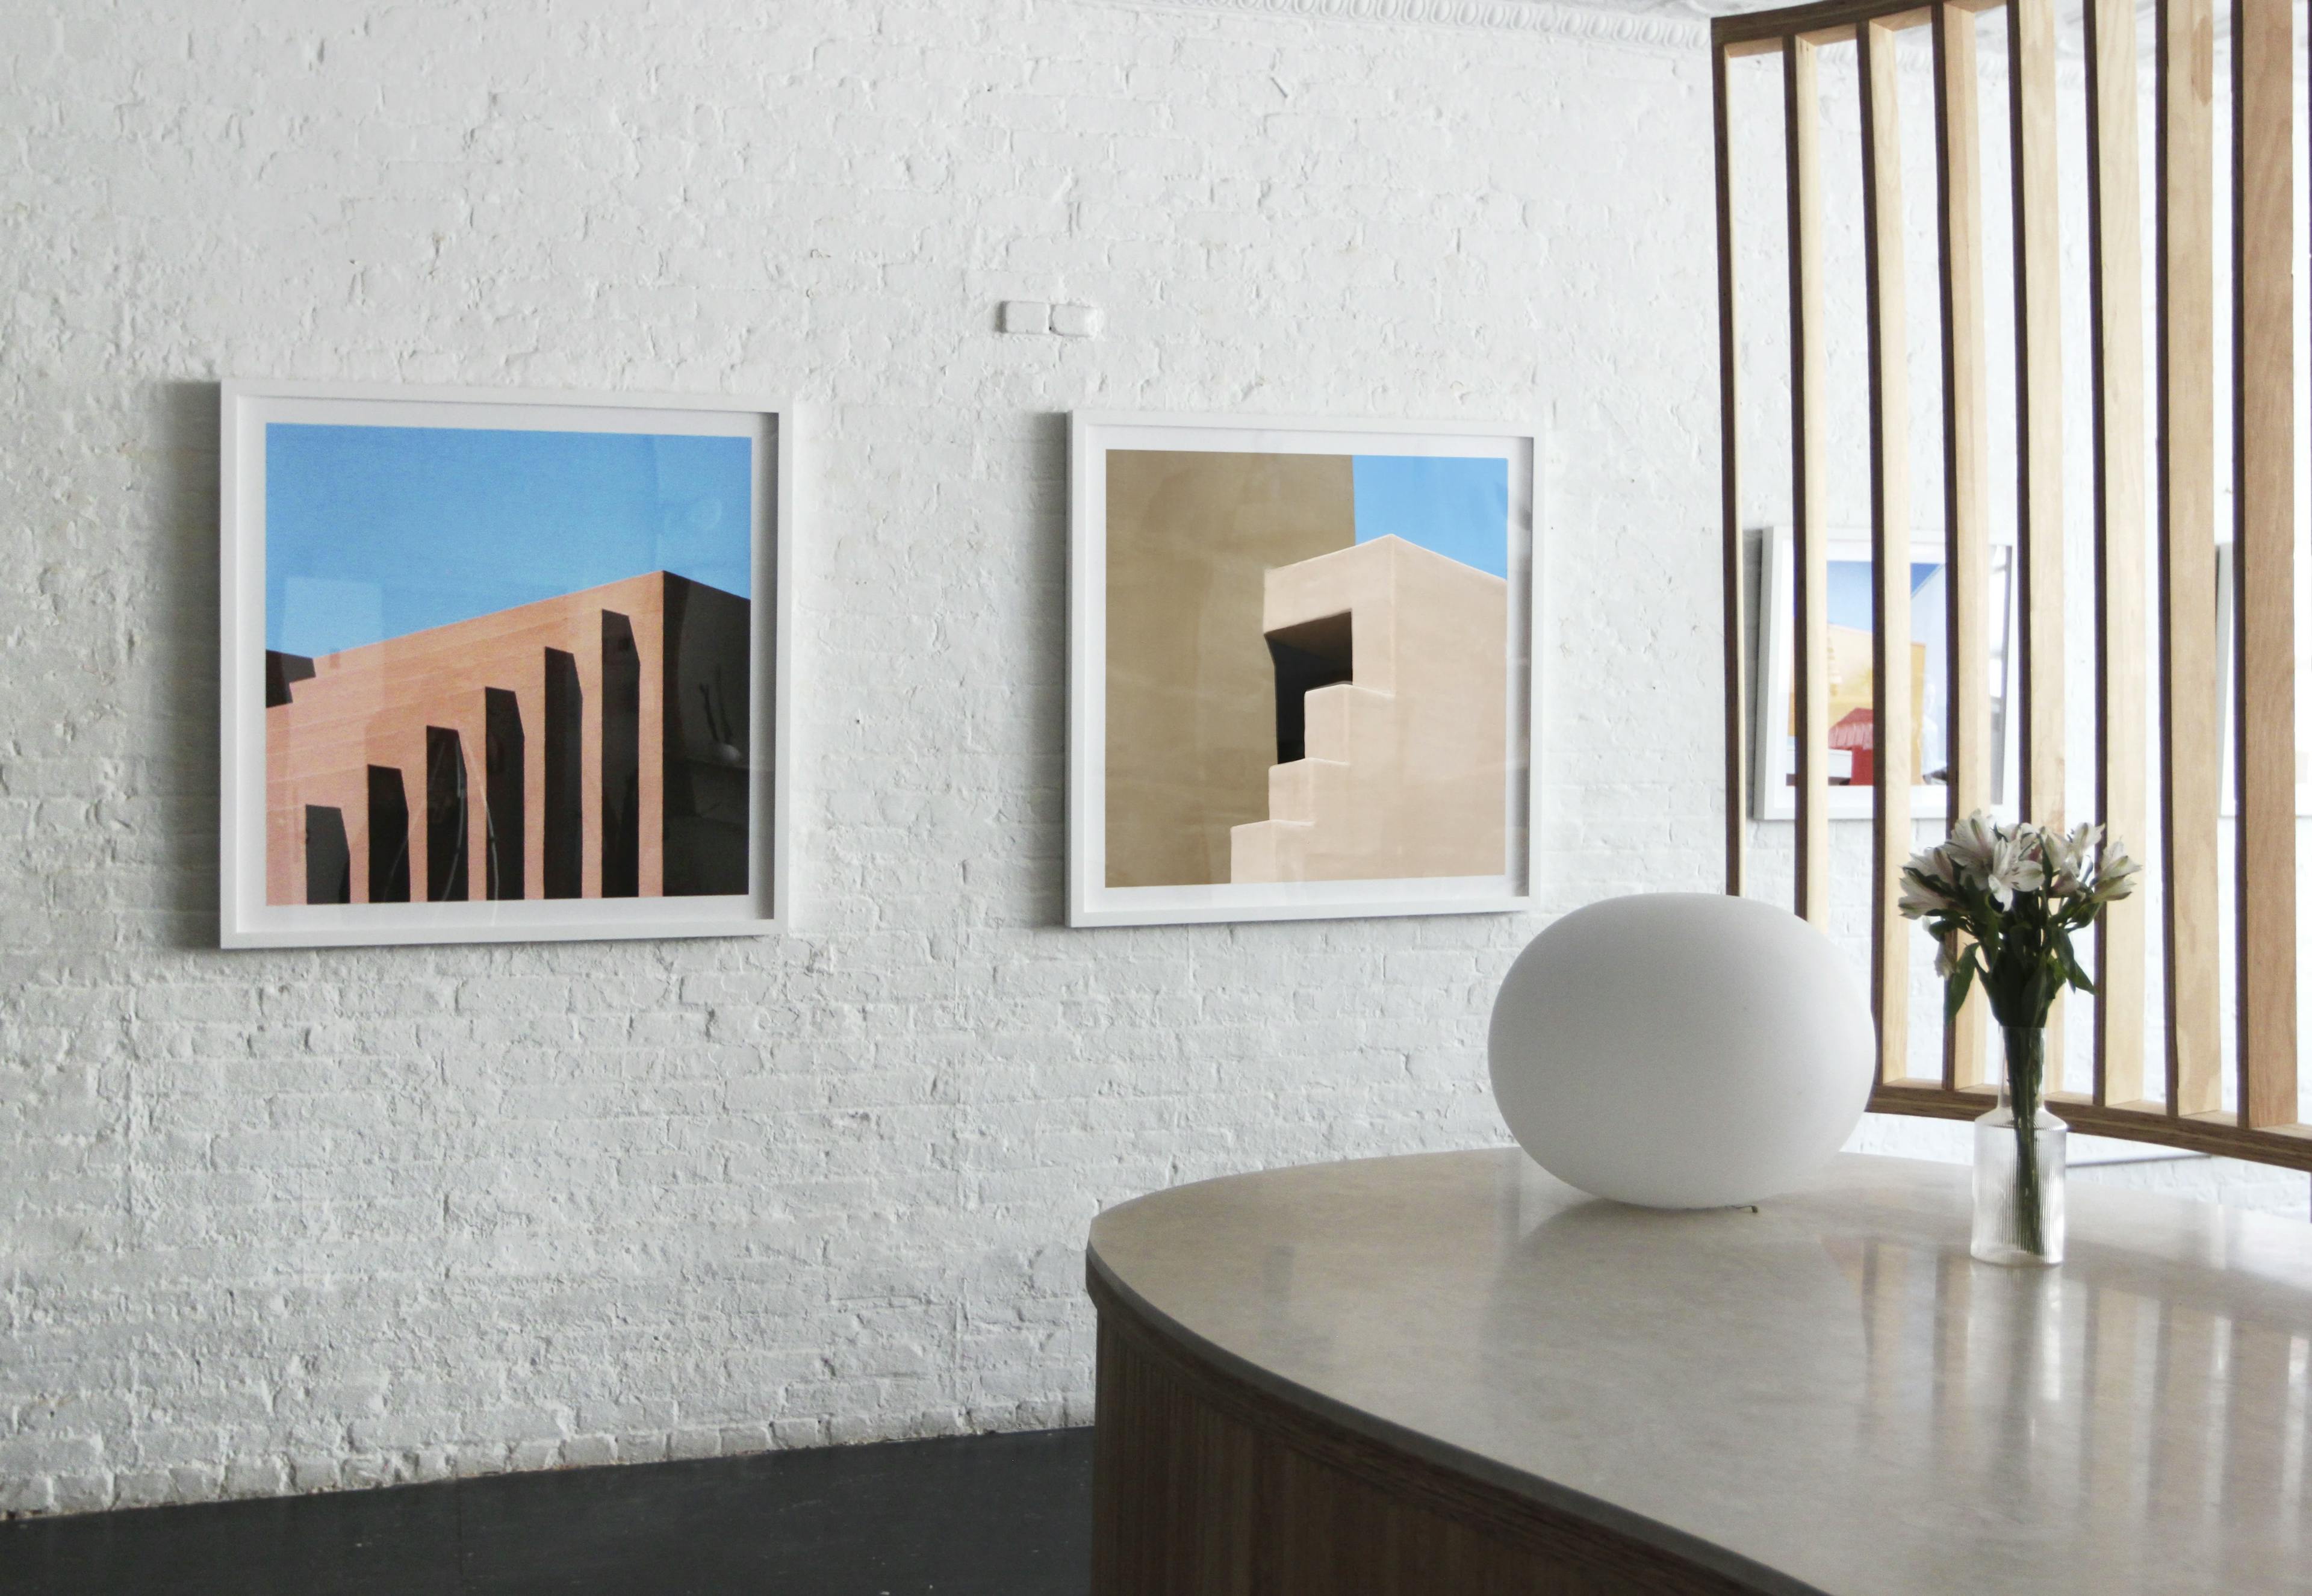 Three framed photographs of exterior architecture by artist Sinziana Velicescu installed on a white brick wall at the Uprise Art showroom.